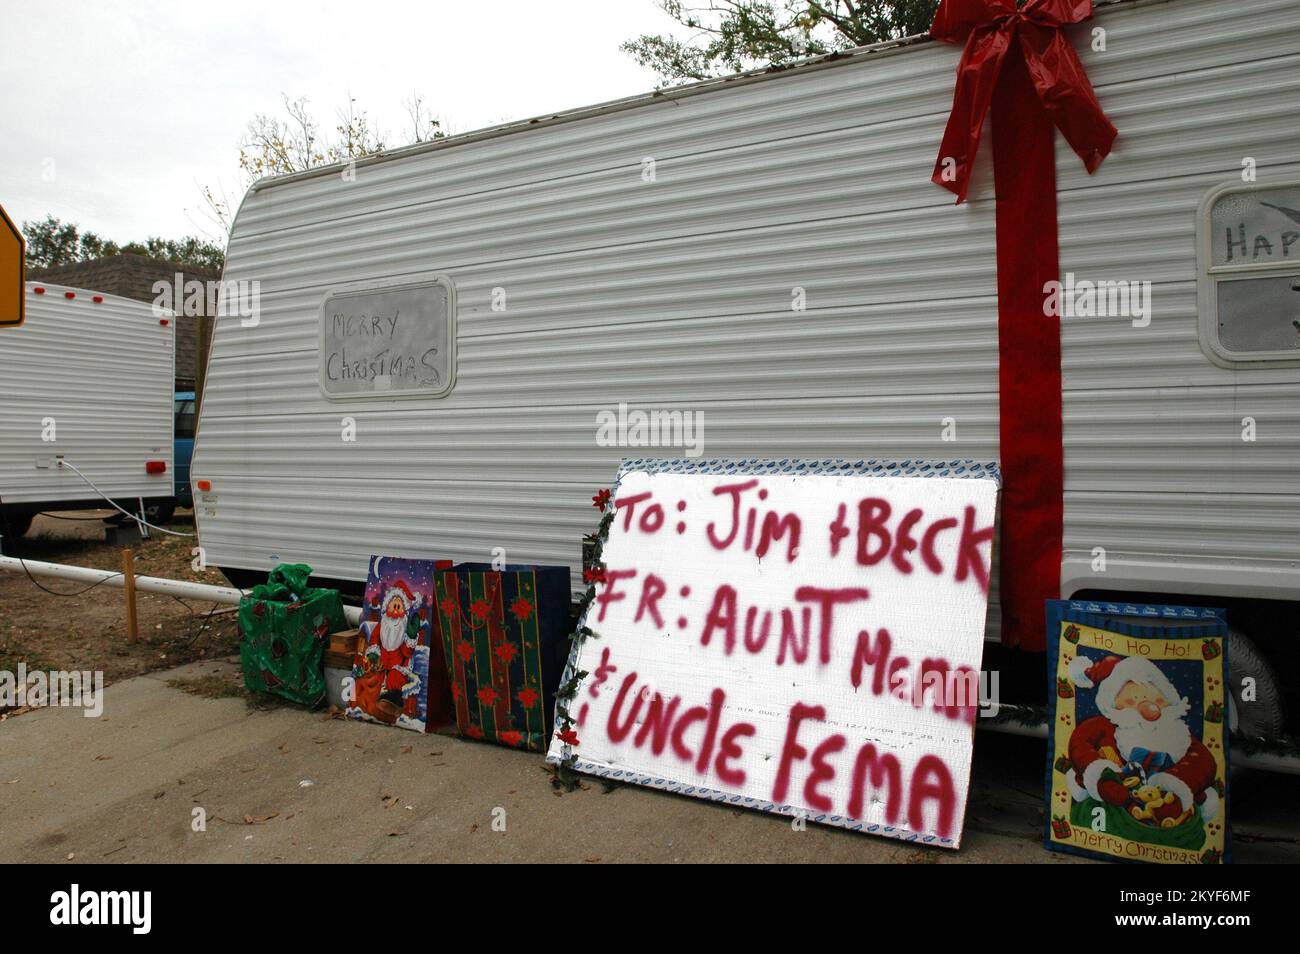 Hurricane Katrina, Pascagoula, Miss., November 26, 2005 -- The Christmas spirit is starting to appear in coastal Mississippi. Mississippians are striving for as much normalcy as possible during their recovery from Hurricane Katrina. Mark Wolfe/FEMA Stock Photo